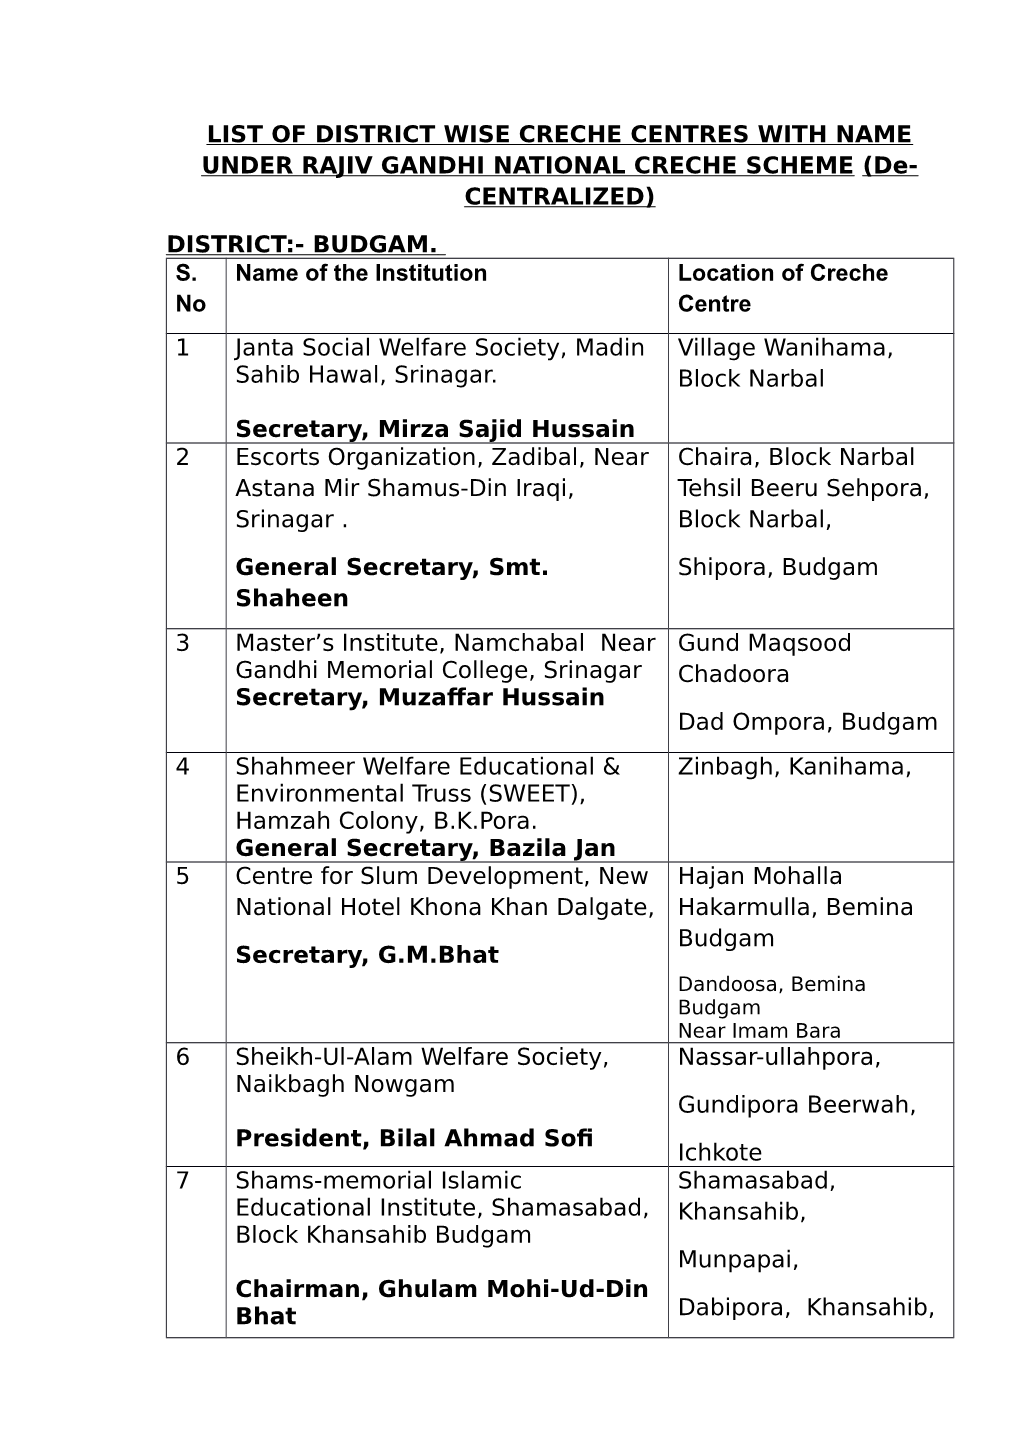 LIST of DISTRICT WISE CRECHE CENTRES with NAME UNDER RAJIV GANDHI NATIONAL CRECHE SCHEME (De- CENTRALIZED)